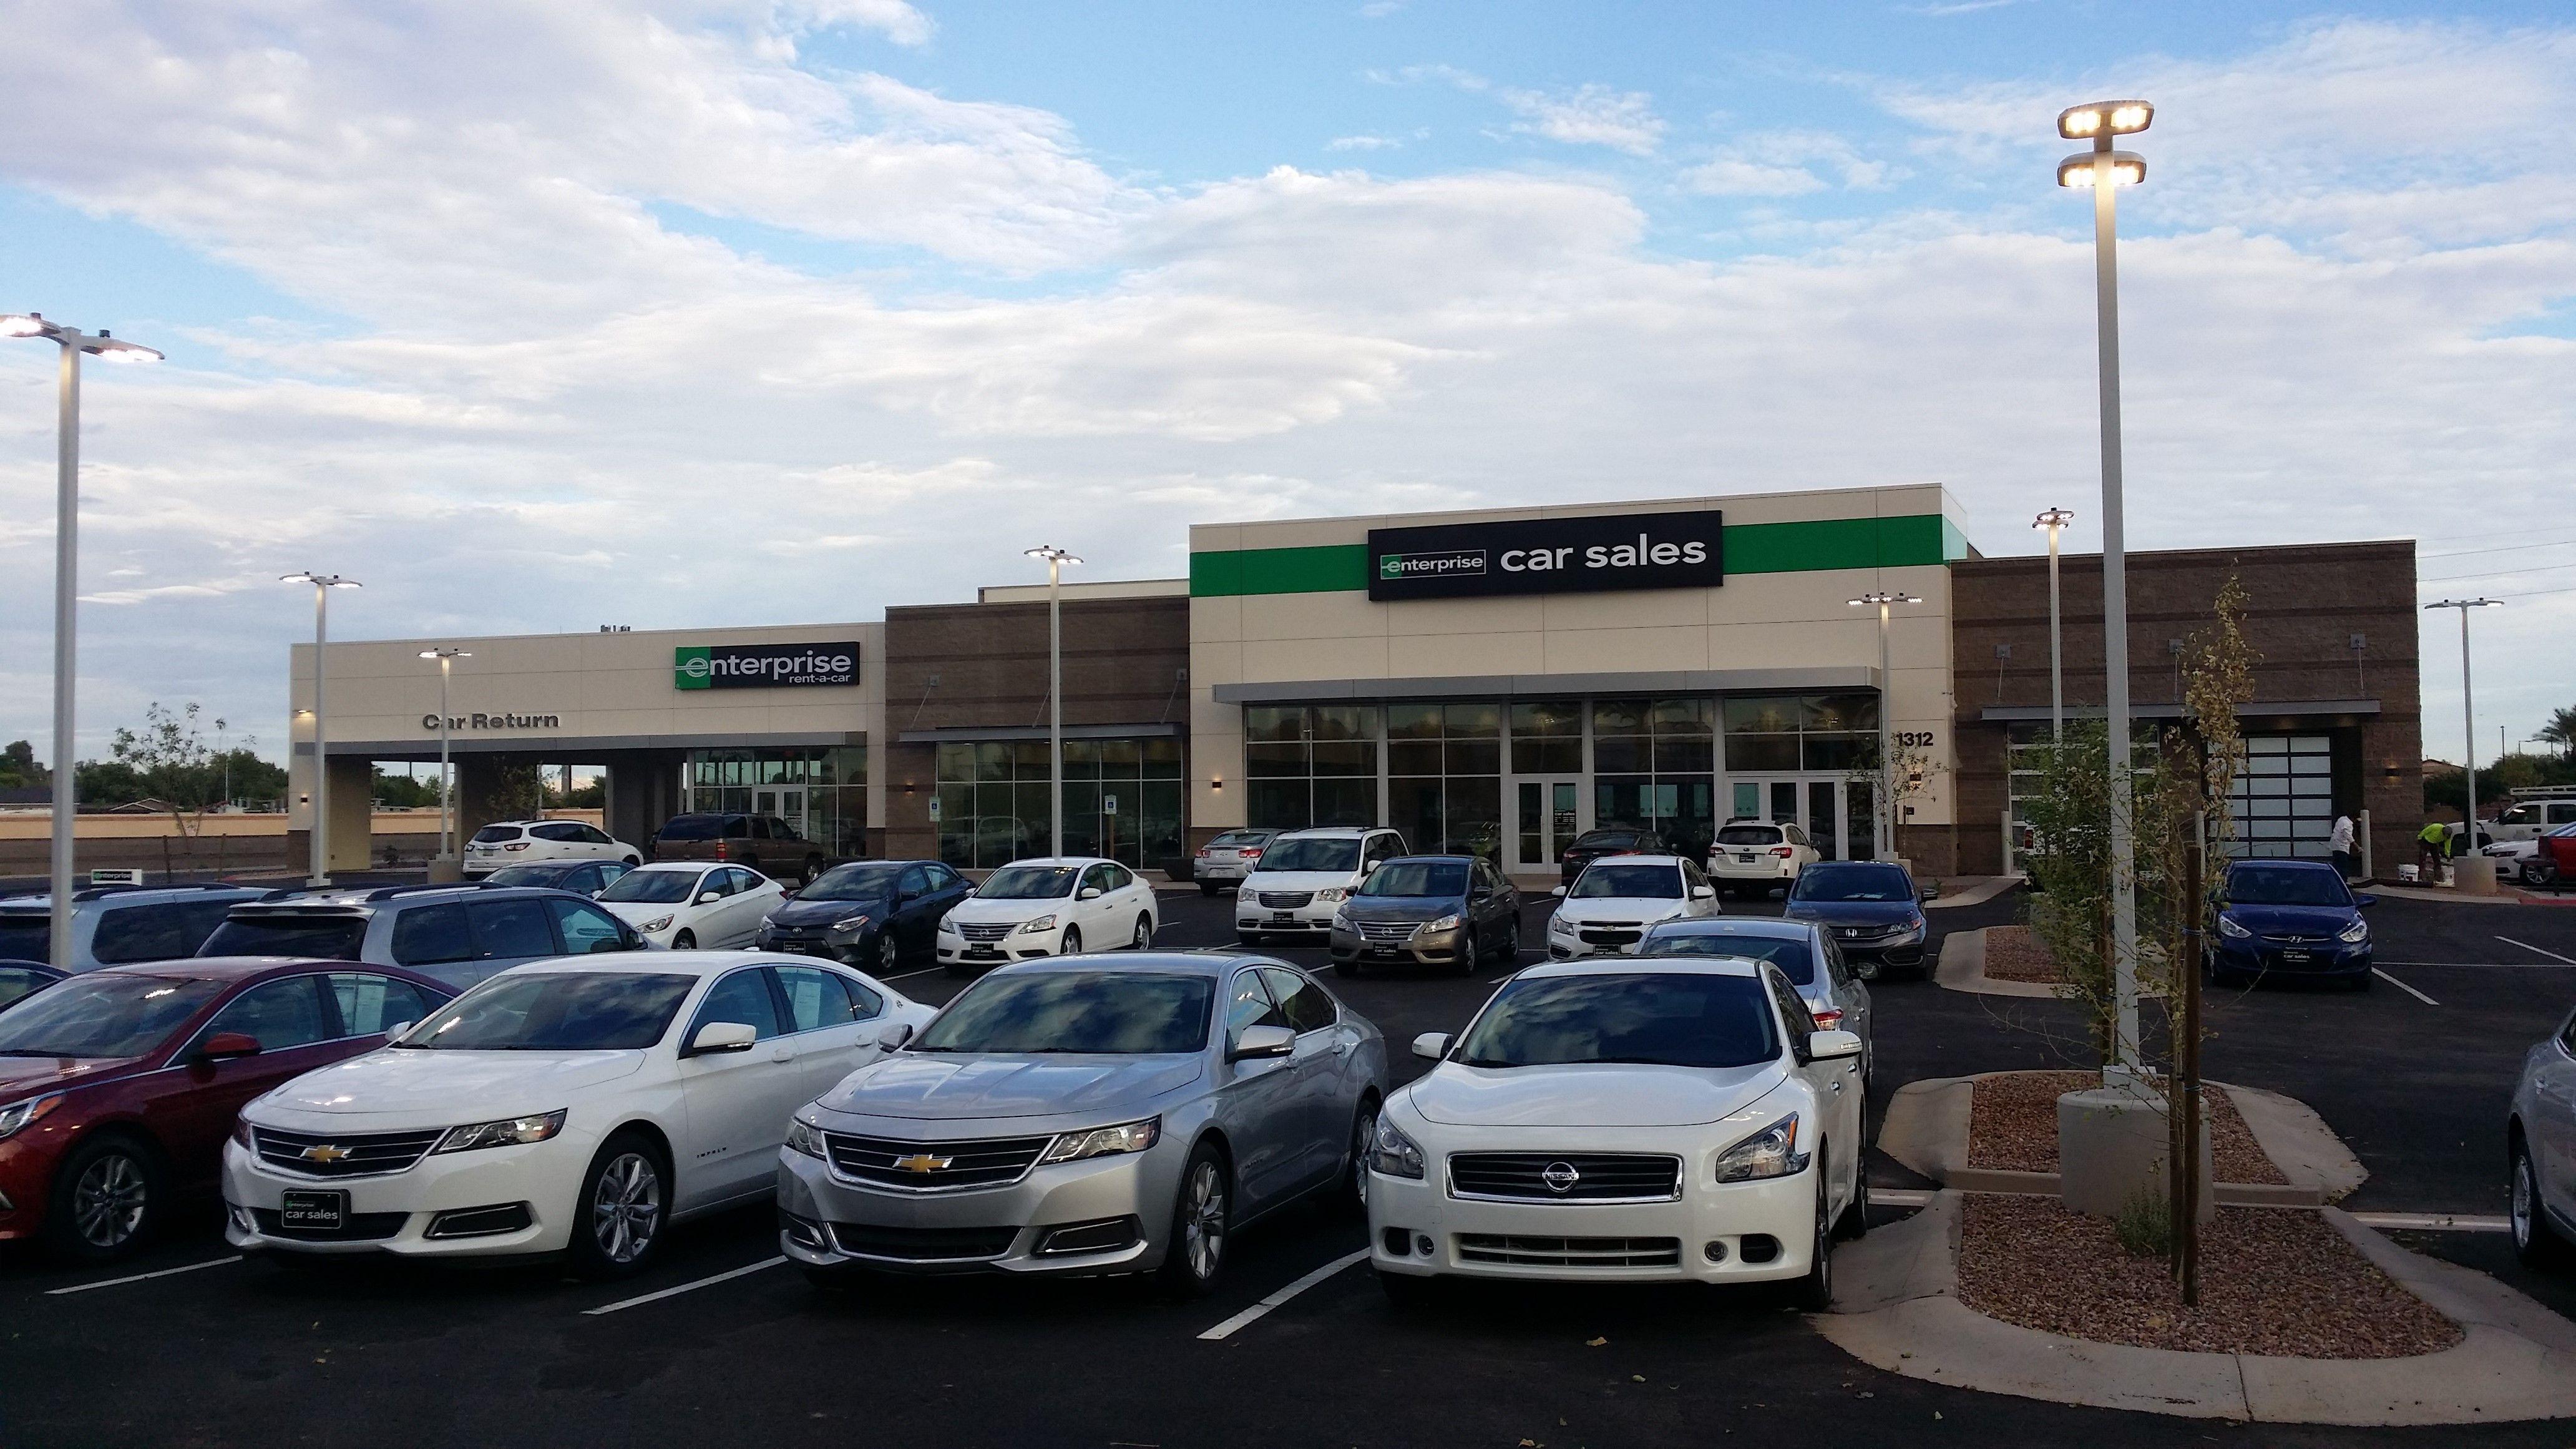 Enterprise Car Sales Logo - Enterprise Car Sales Expanding Nationwide, Two New Locations in ...